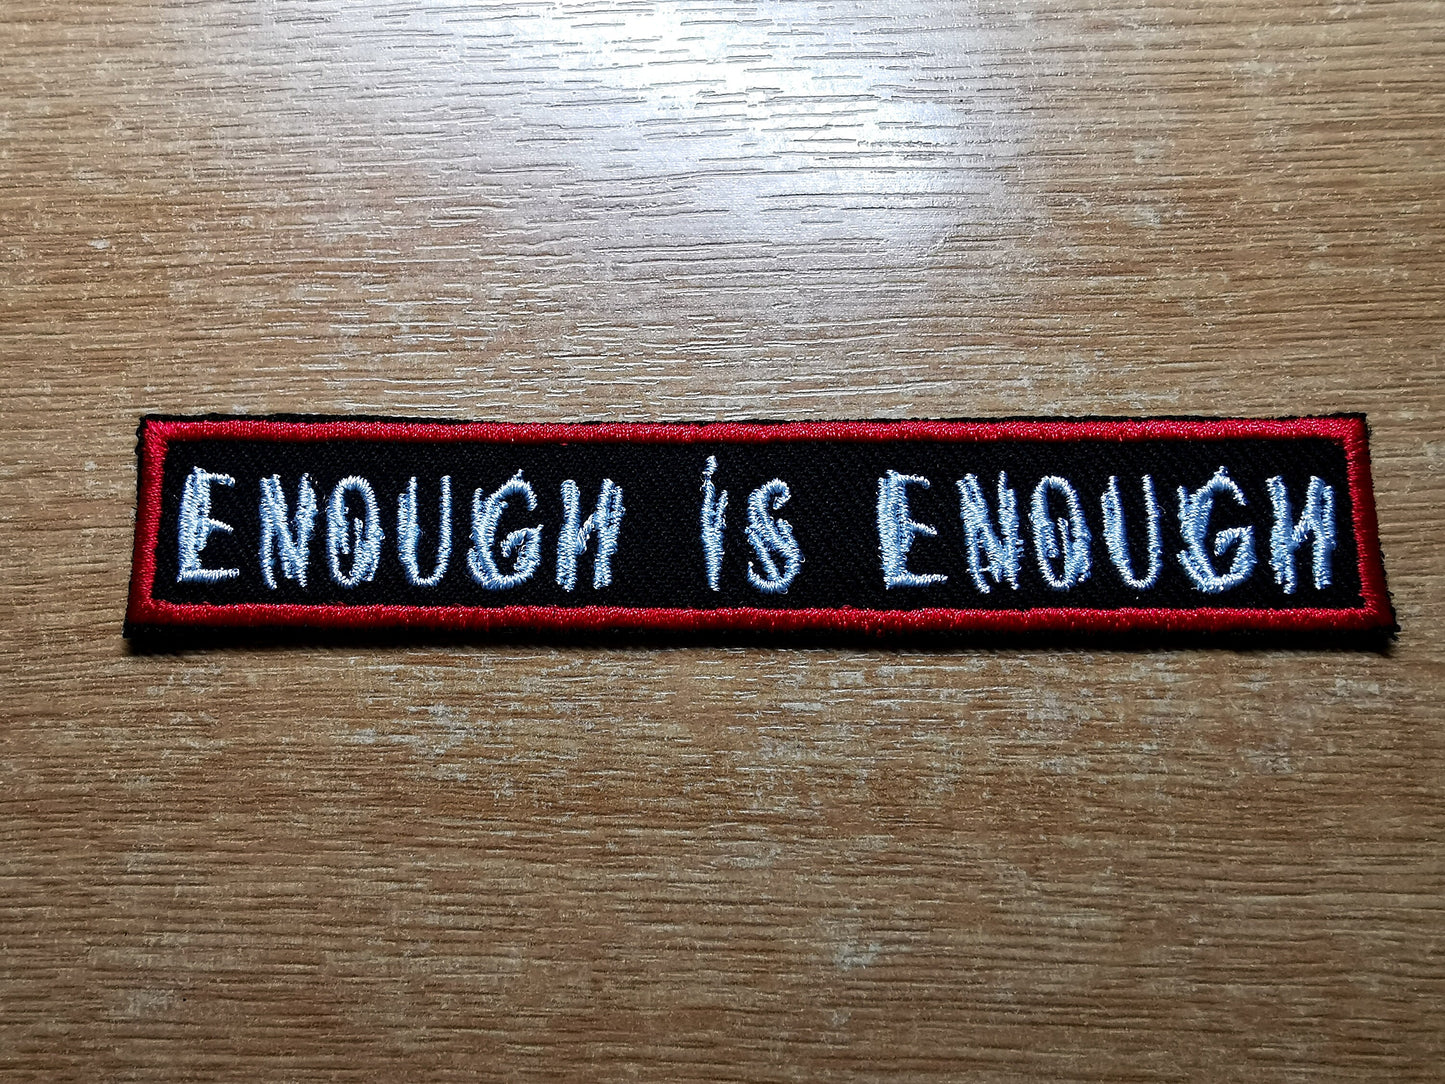 Enough is Enough Campaign Patch Strikers Mick Lynch Sultana Anti Tory Tories Out Labour Left Wing Corbyn Climate Rebellion